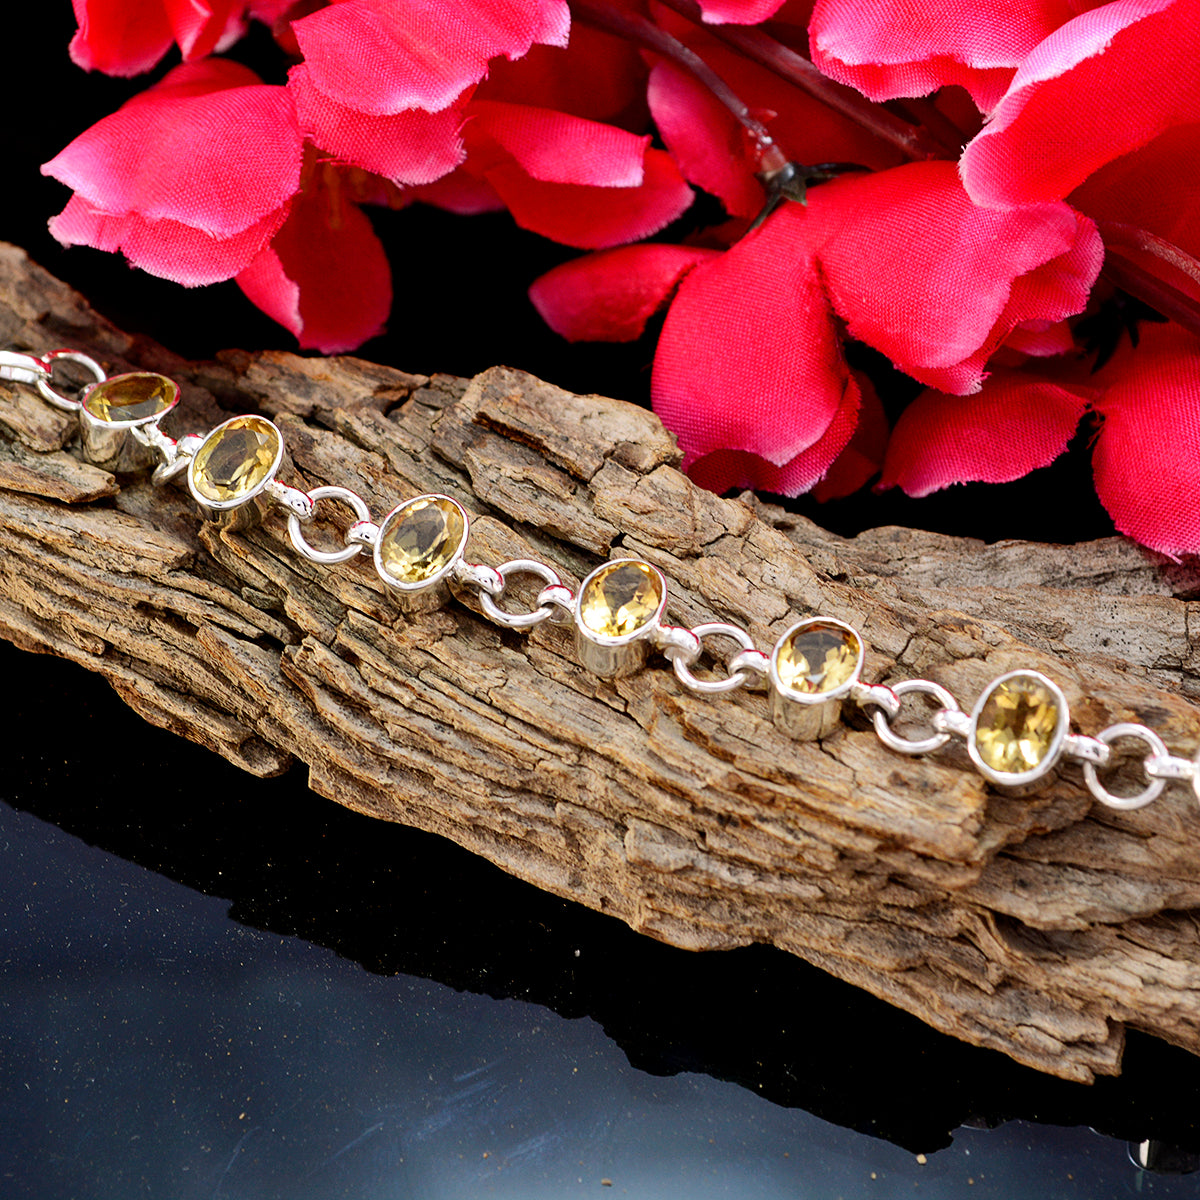 Riyo Real Gemstones Oval Faceted Yellow Citrine Silver Bracelet gift for mom birthday